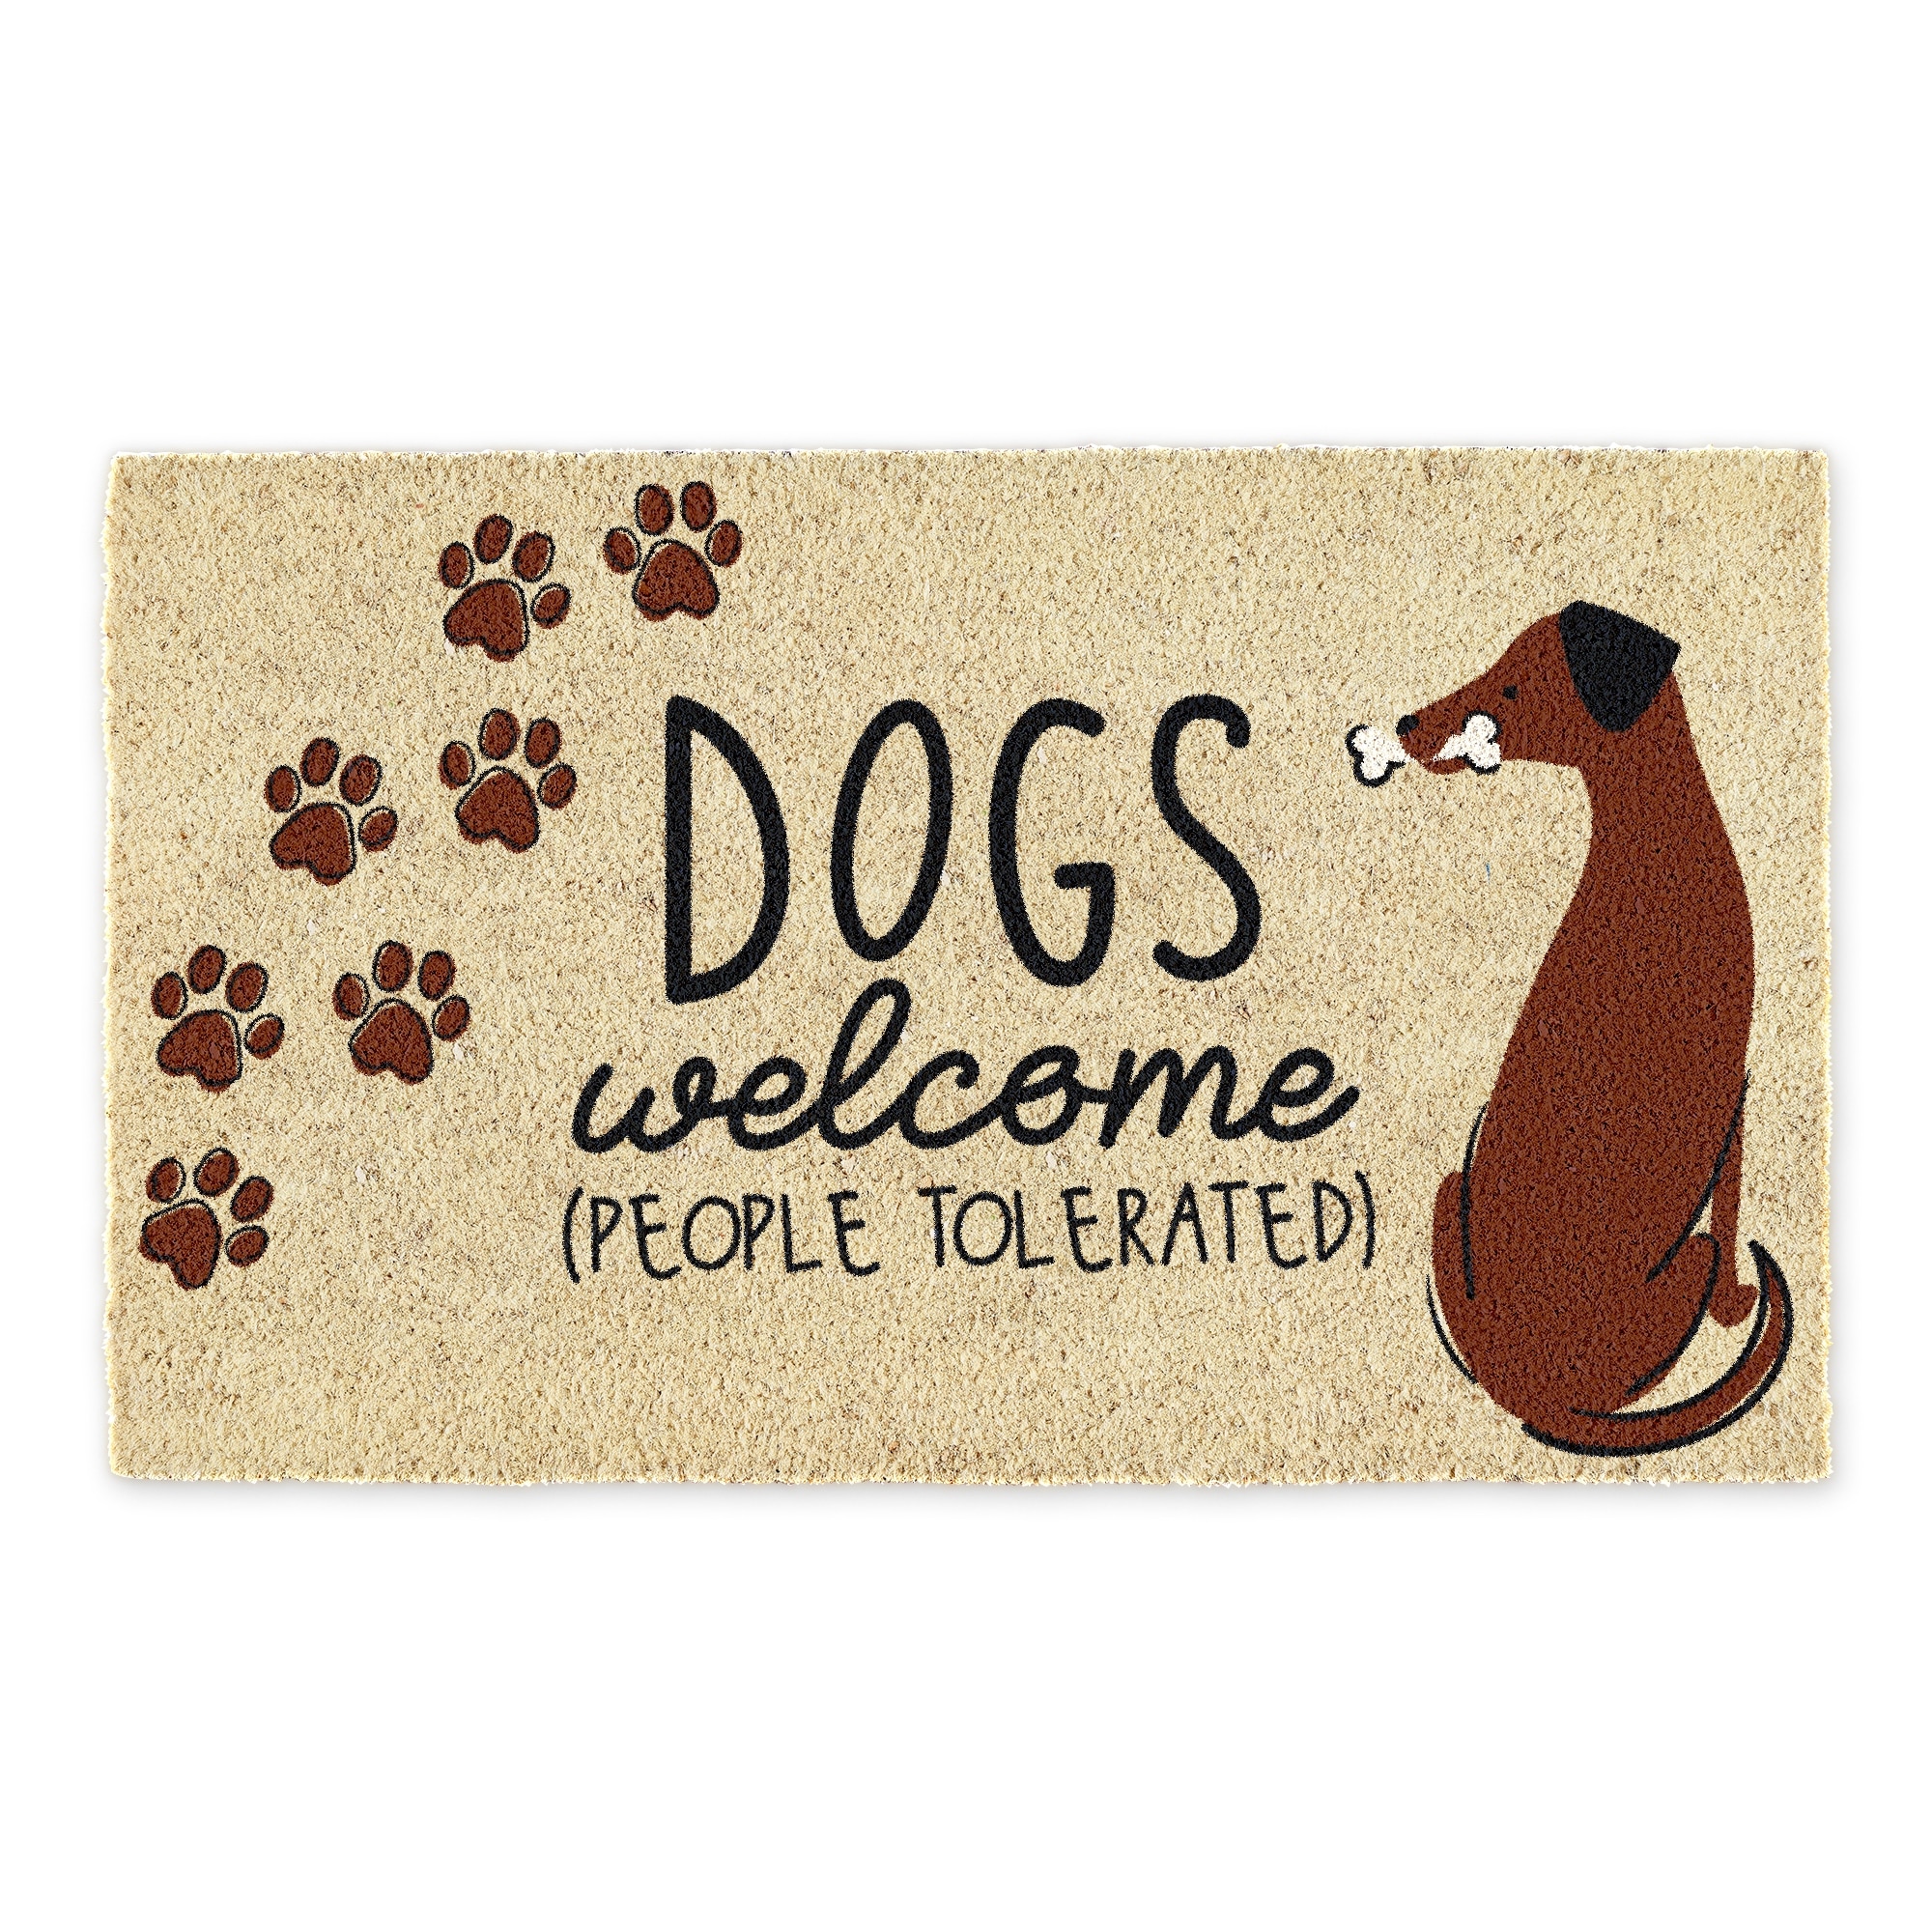 https://ak1.ostkcdn.com/images/products/is/images/direct/e54c7df955732241b2526be475425f80c7162dce/Home-Dog-Doormat-17x29.jpg